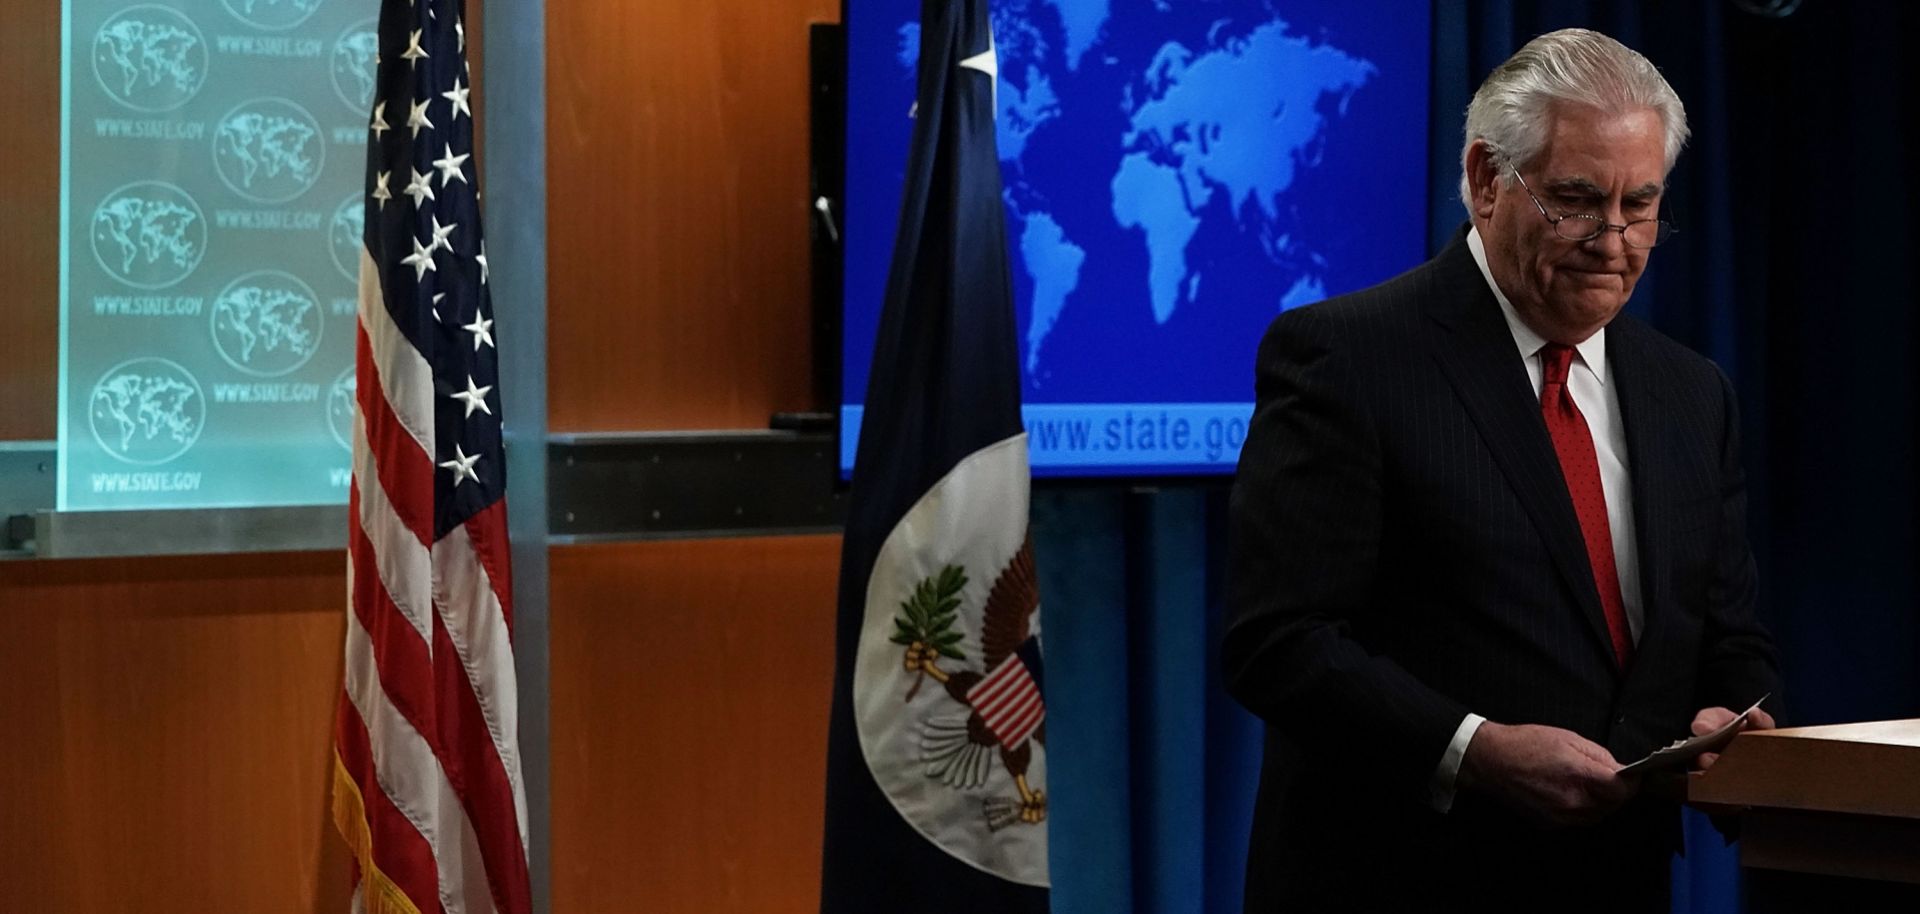 U.S. Secretary of State Rex Tillerson leaves the podium after a news conference at the State Department in Washington on March 13, 2018.